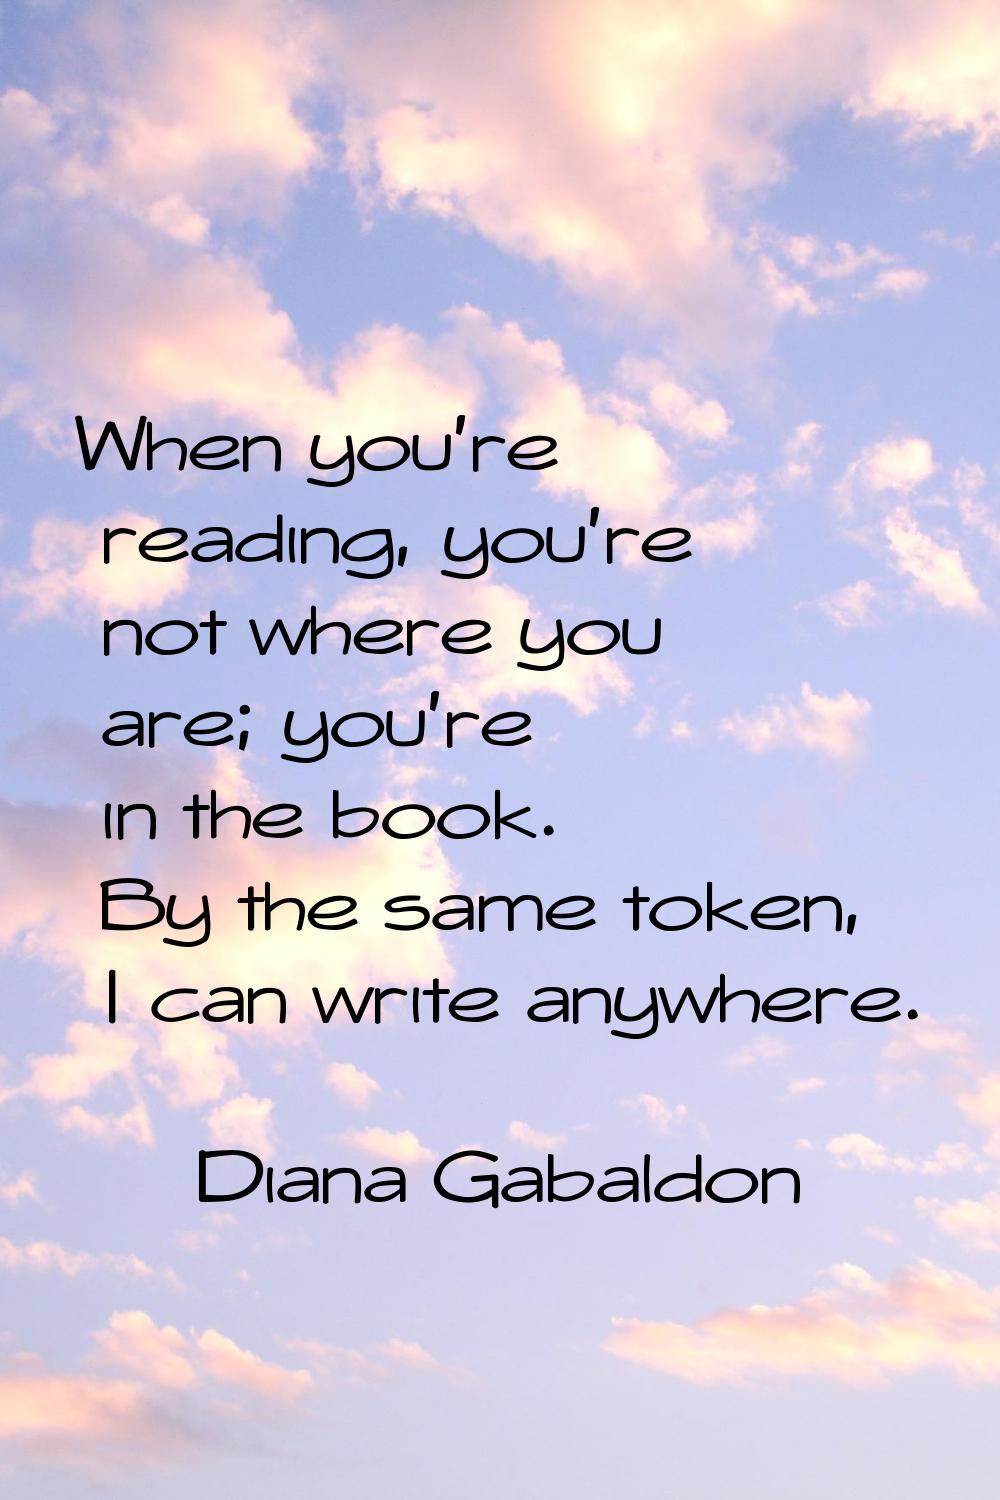 When you're reading, you're not where you are; you're in the book. By the same token, I can write a